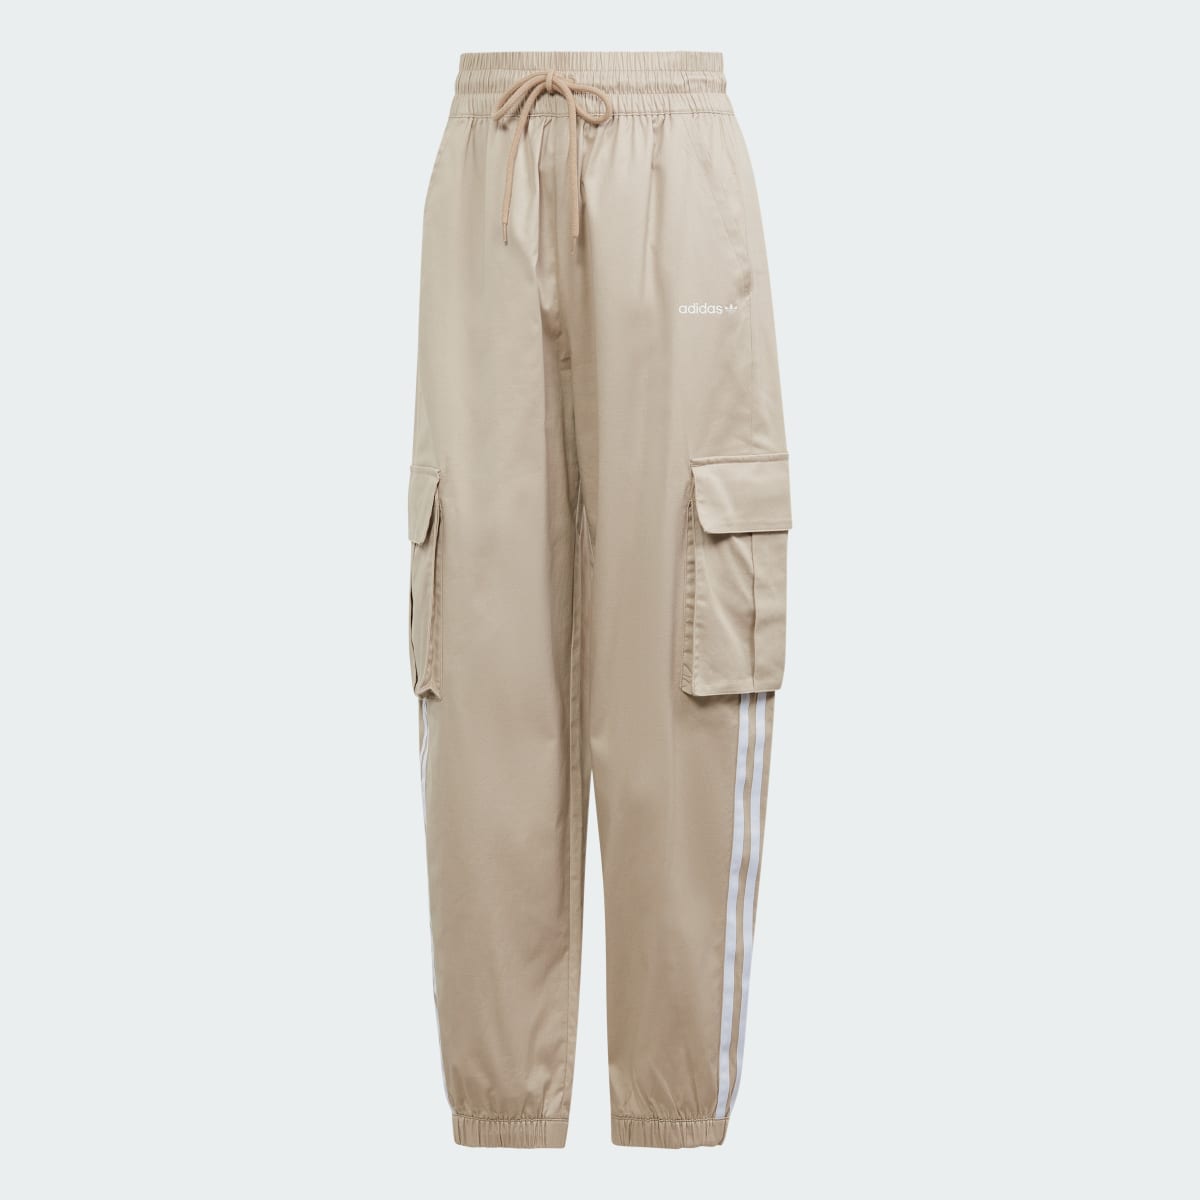 Adidas Cargo Trousers. 4